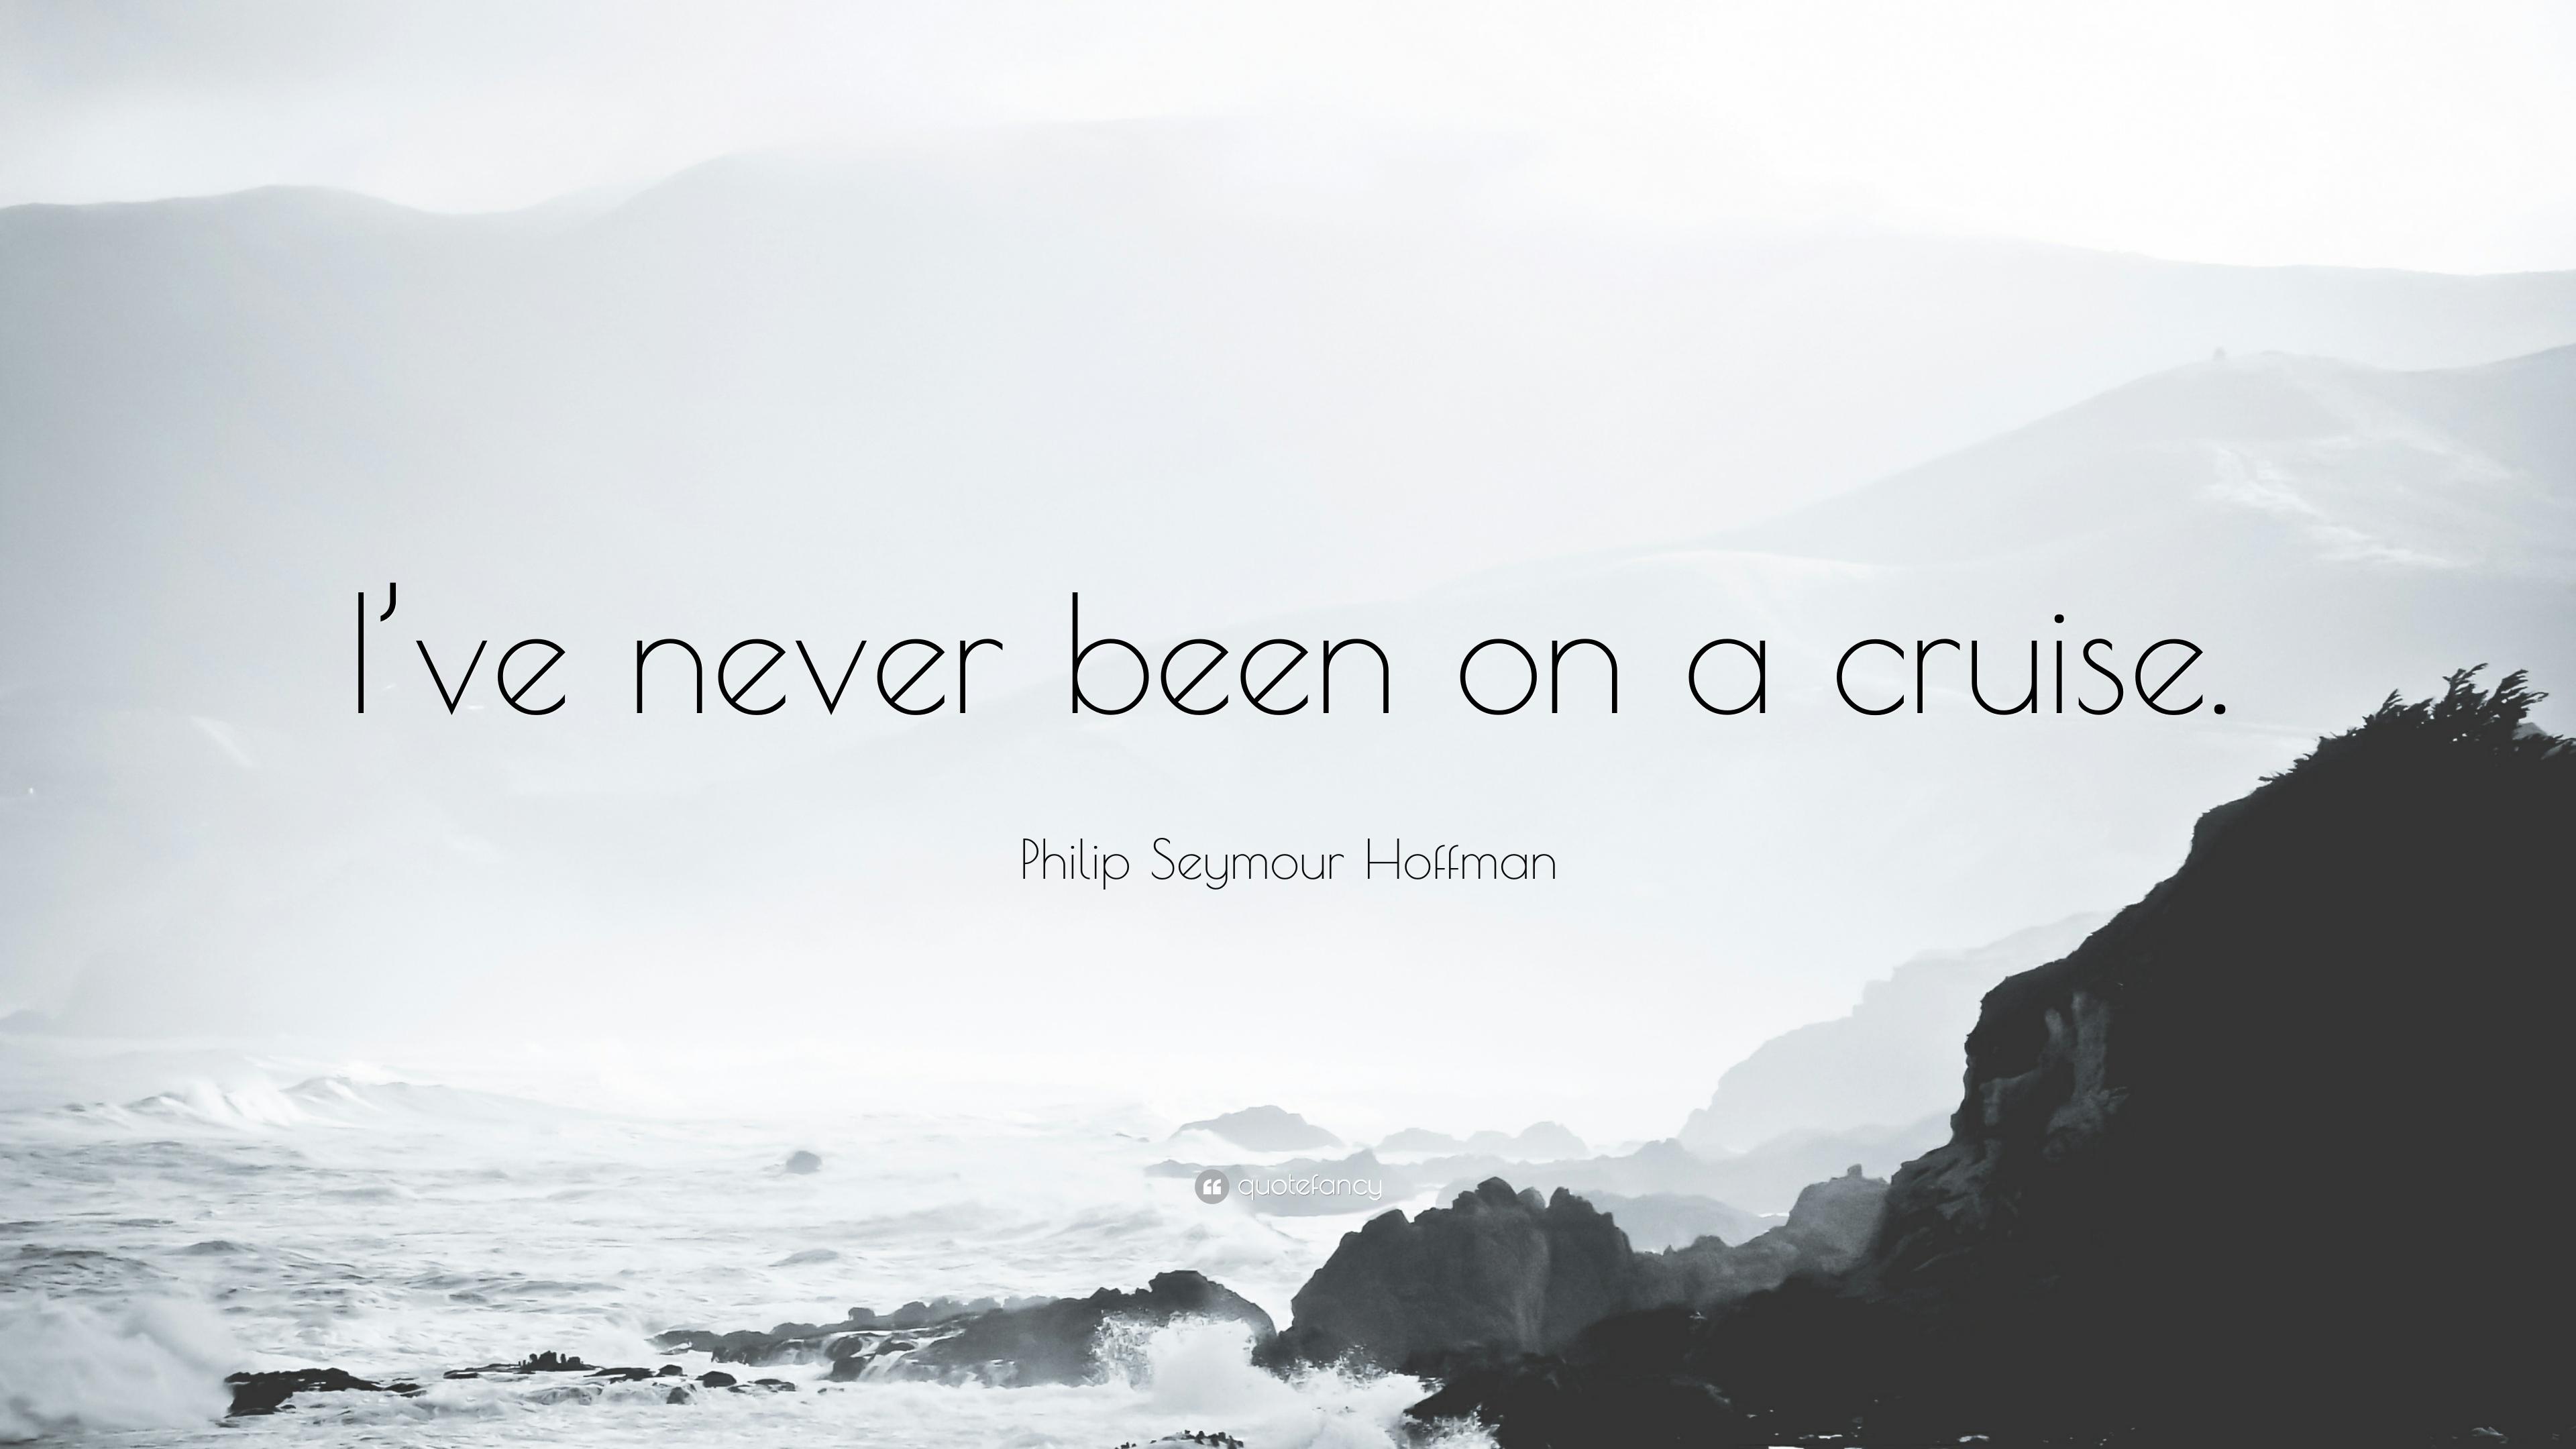 Philip Seymour Hoffman Quote: “I've never been on a cruise.” 7